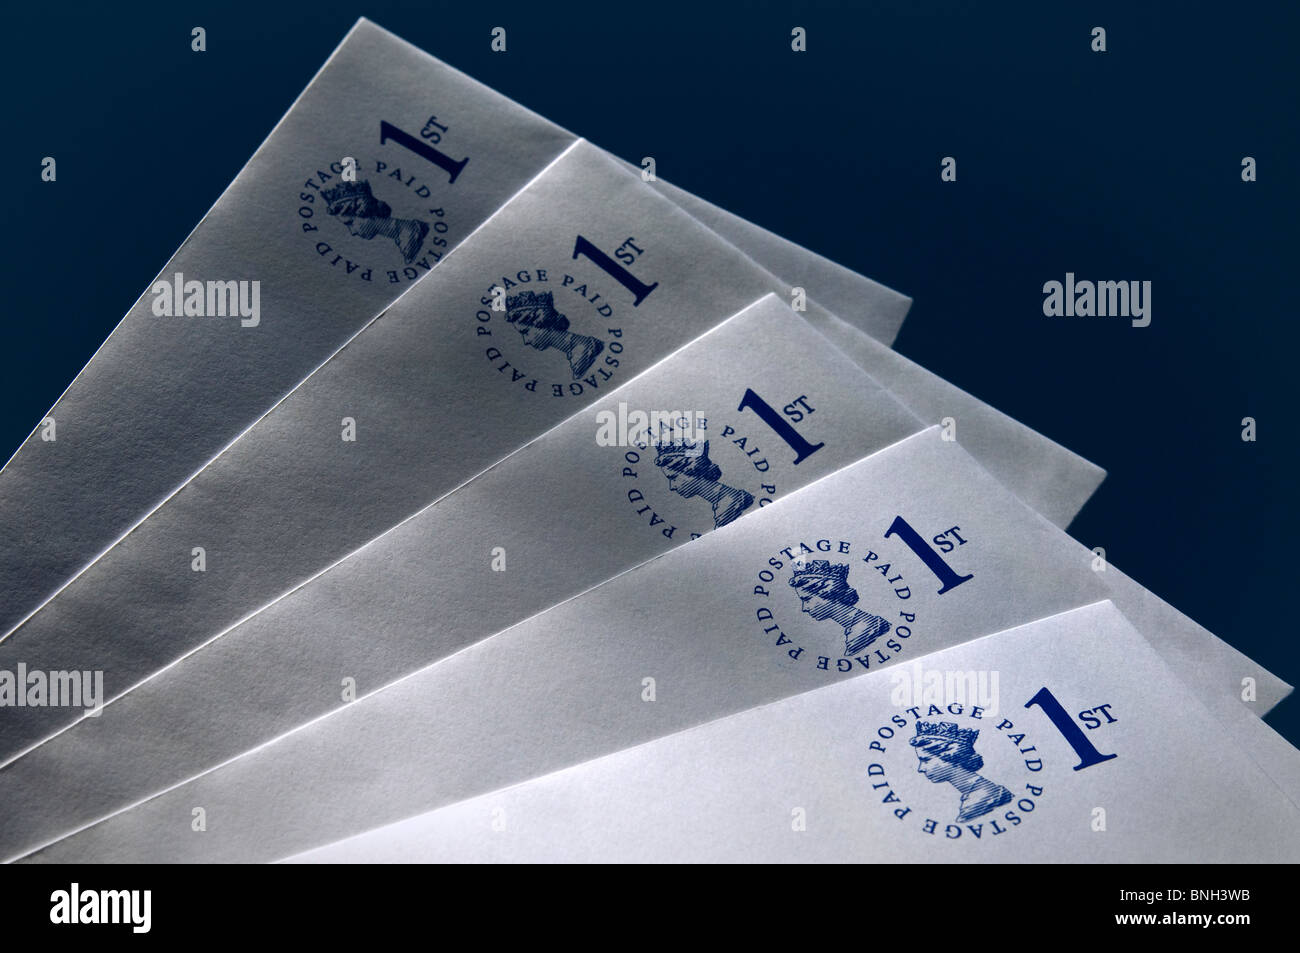 ENVELOPES Pre-paid UK first class envelopes on dark blue background with dappled shafts of sun Stock Photo